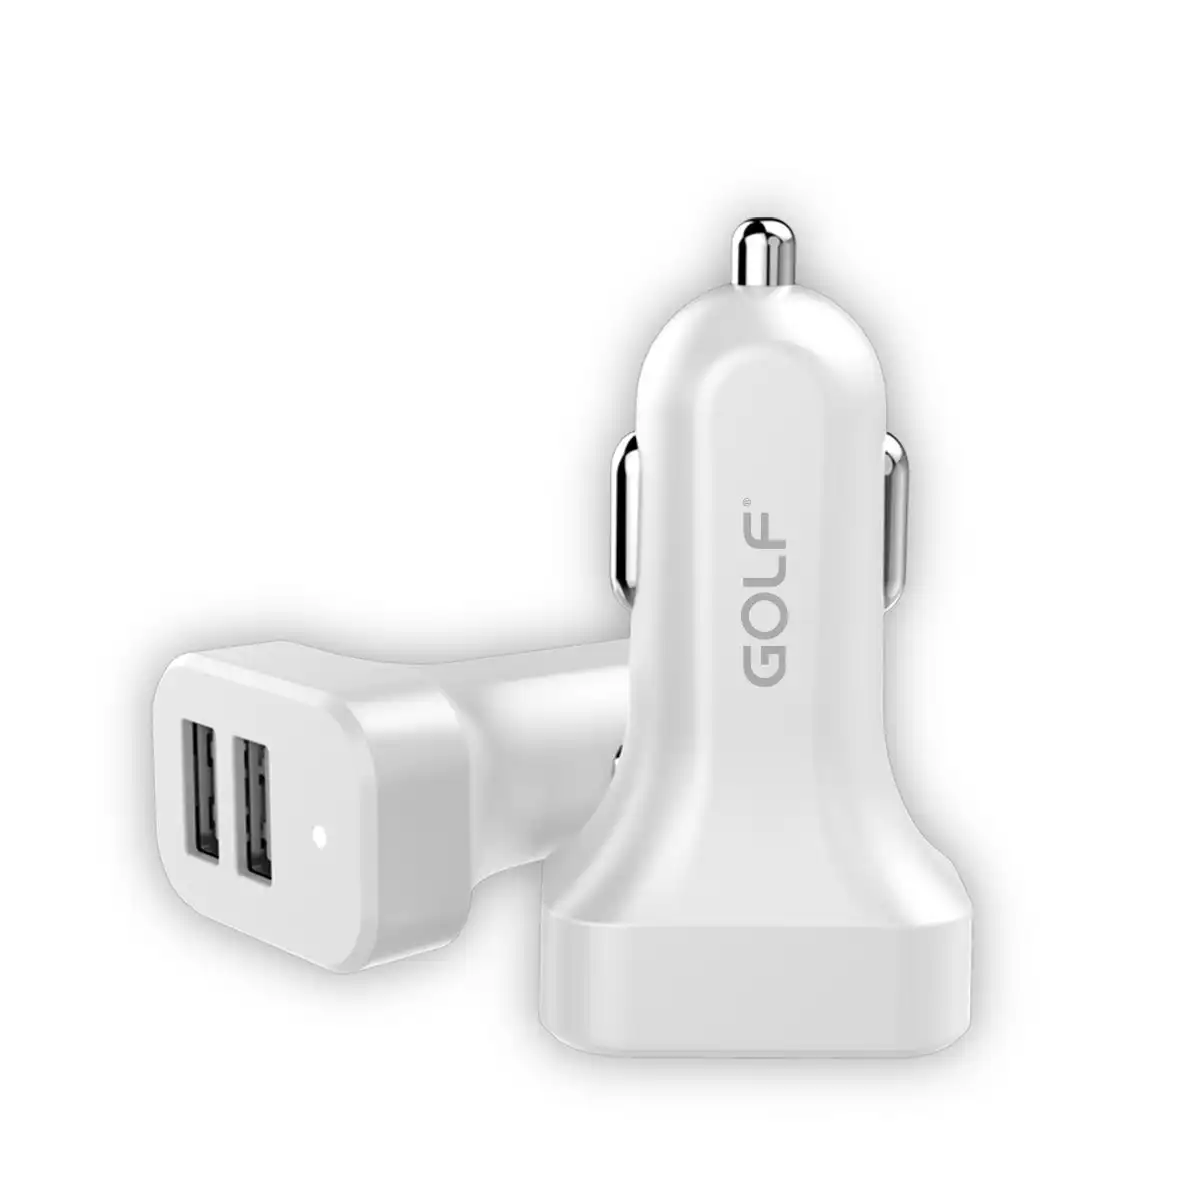 Golf GF-C11 Double USB Mini 2.1A Smart Car Charger Travel 12V 24V Universal Car Mounted Charger White